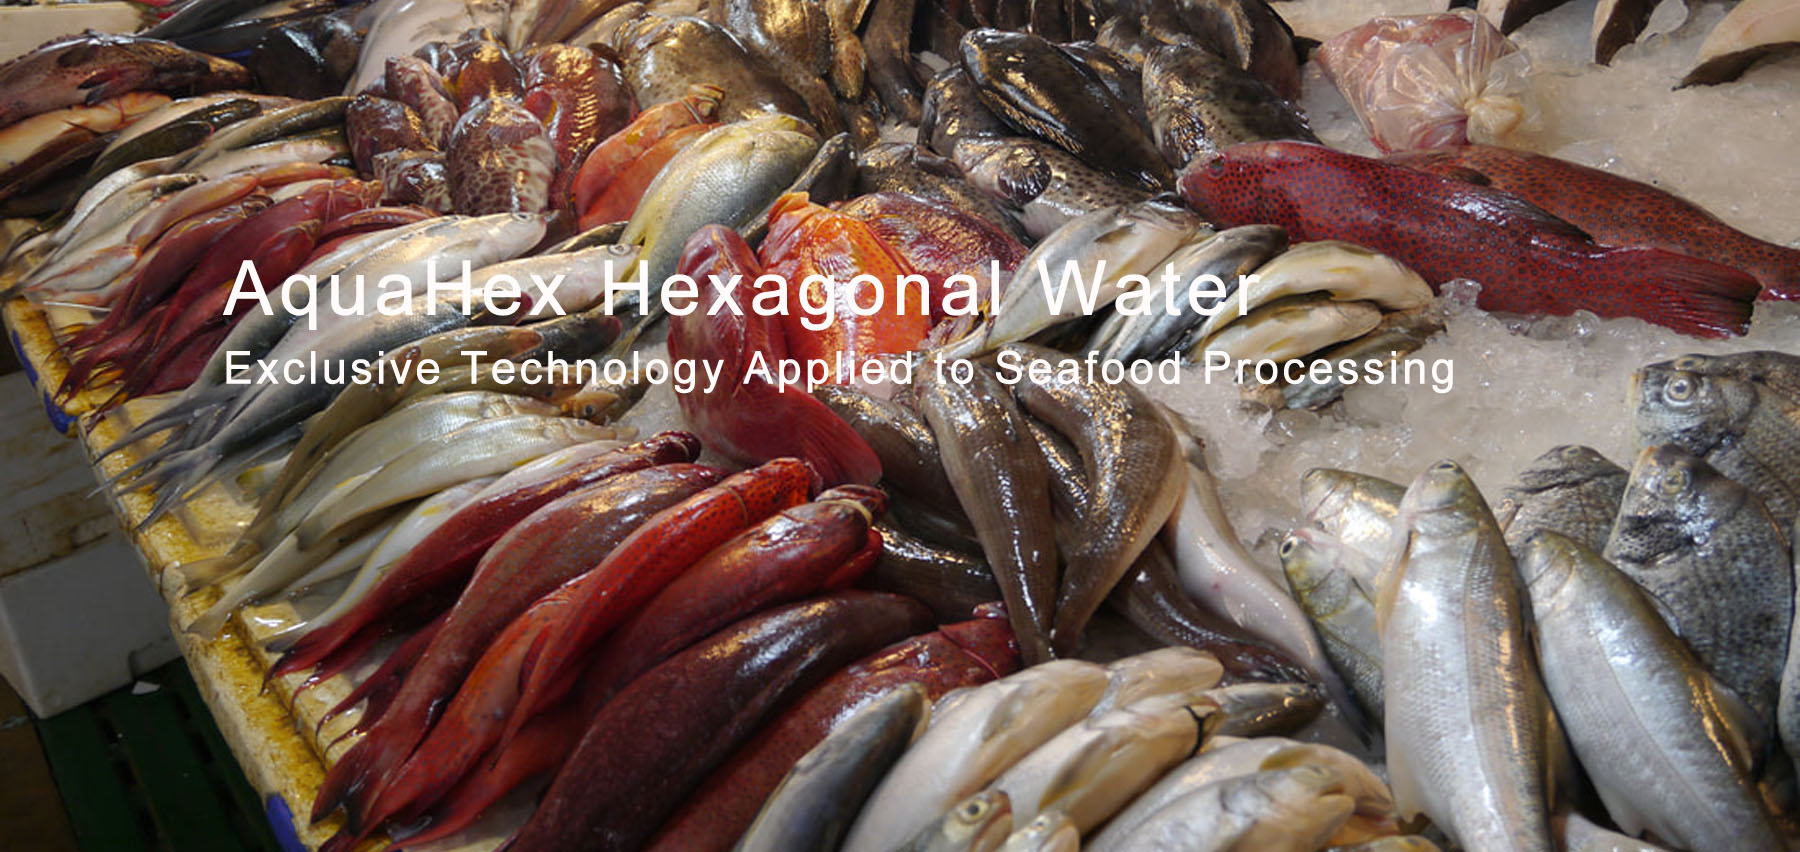 AquaHex hexagonal water applied to seafood processing